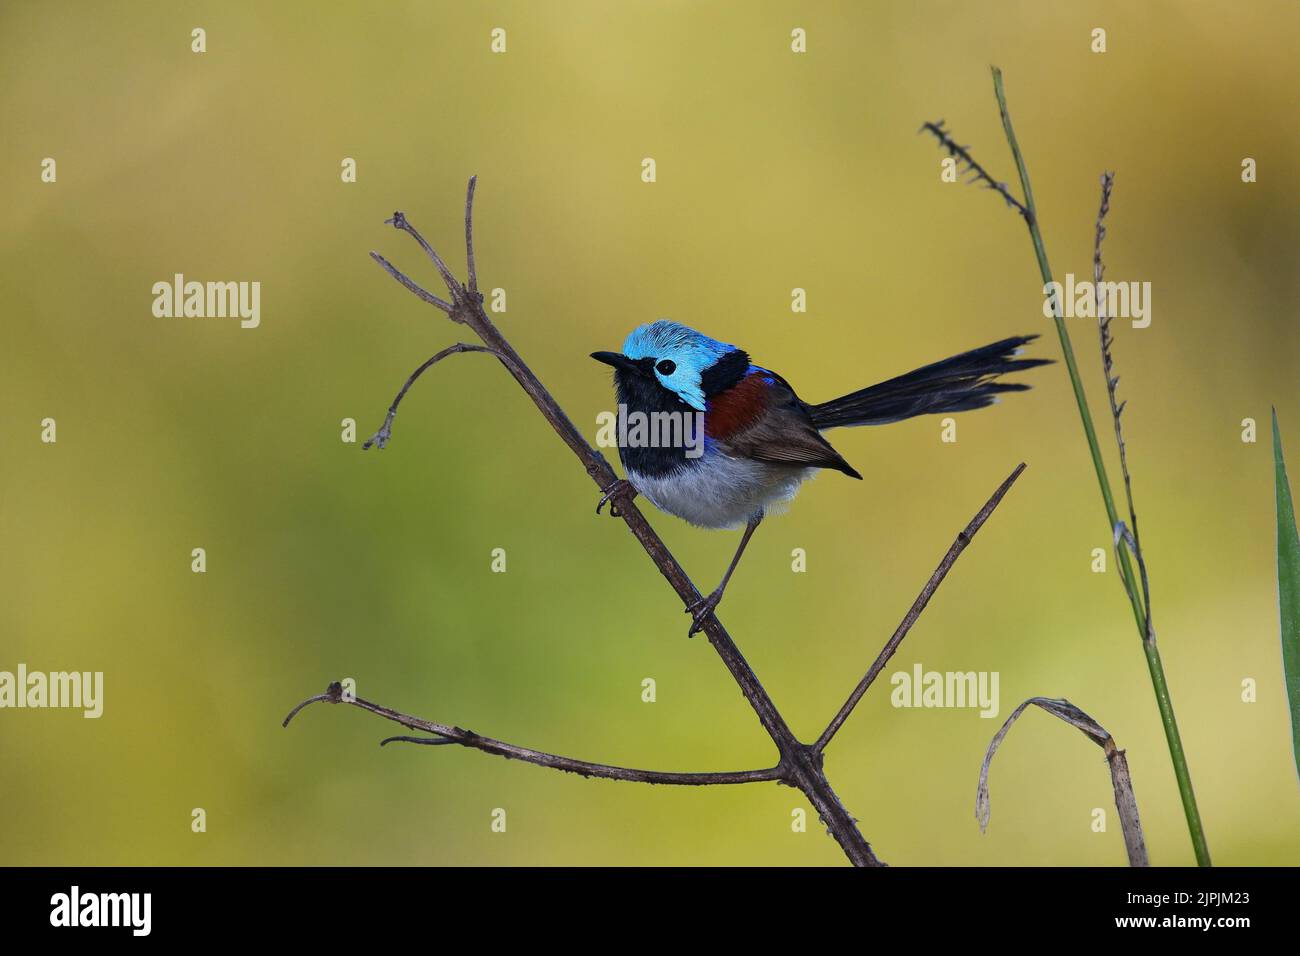 An Australian male Variegated Fairy-wren -Malurus lamberti, Nominate race- bird perched on a stem of tall grass surveying his territory Stock Photo